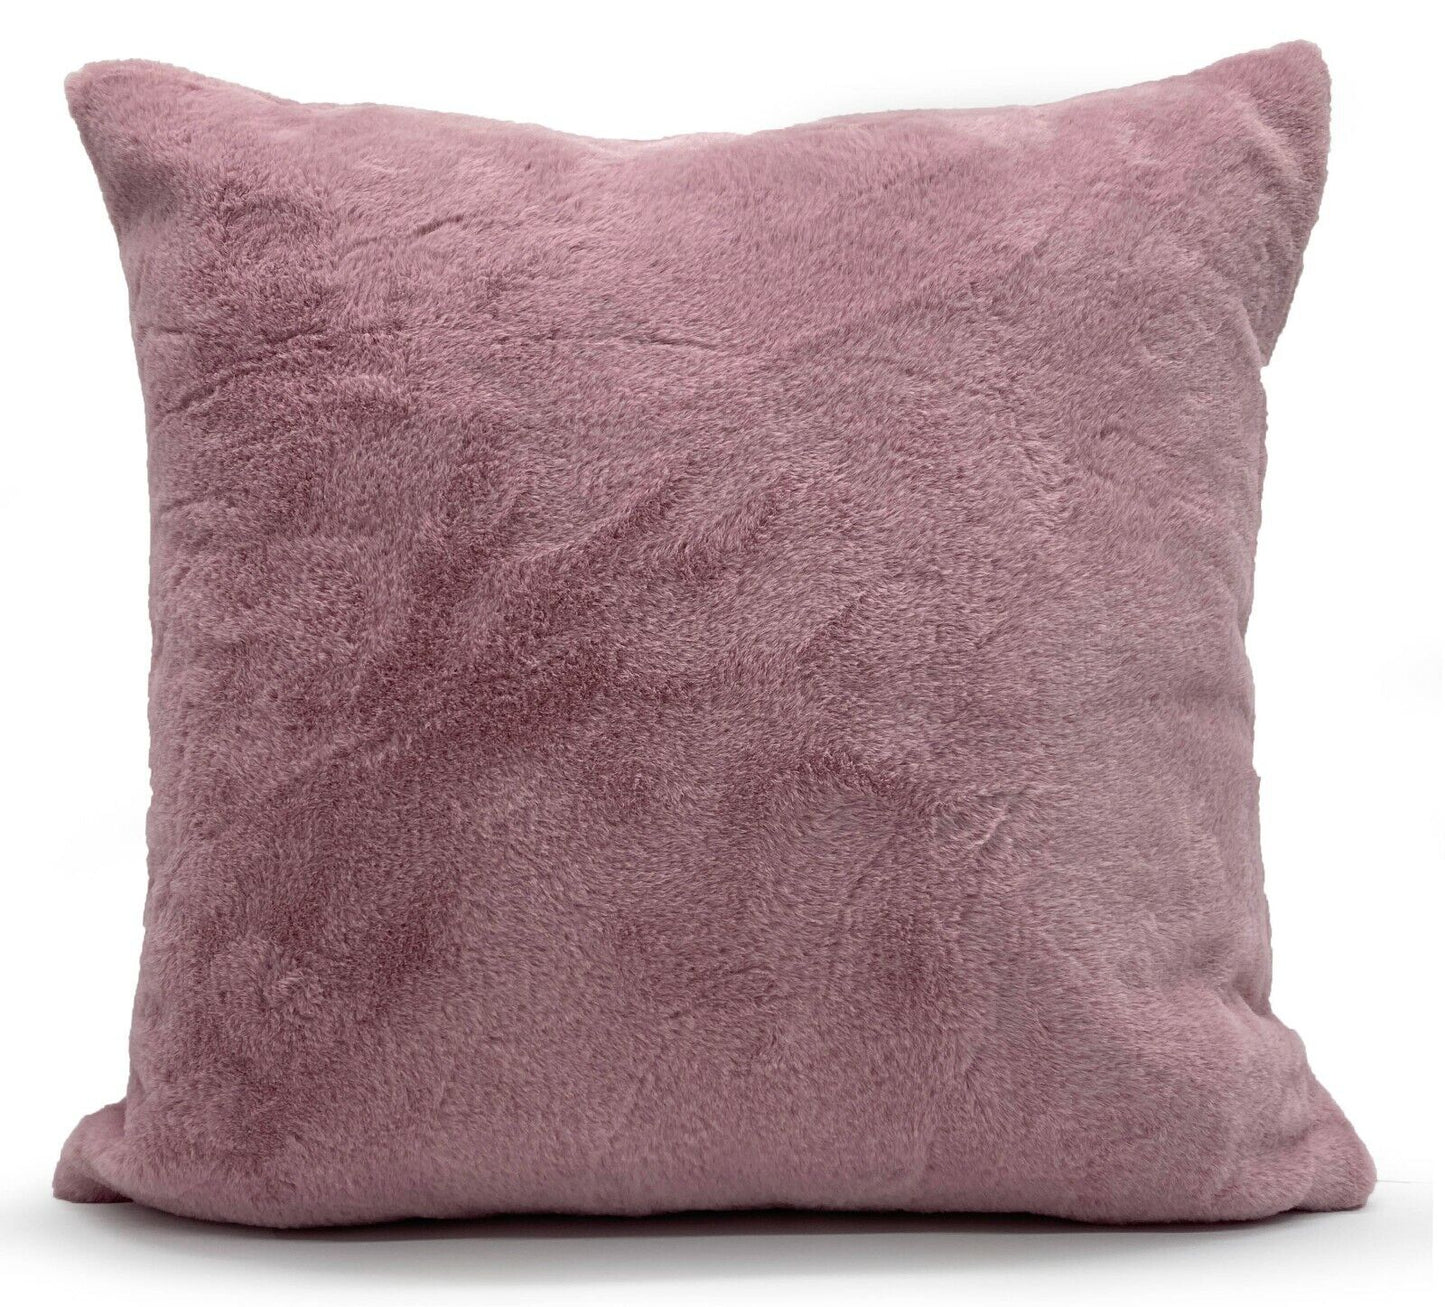 Faux fur cushion covers Pink